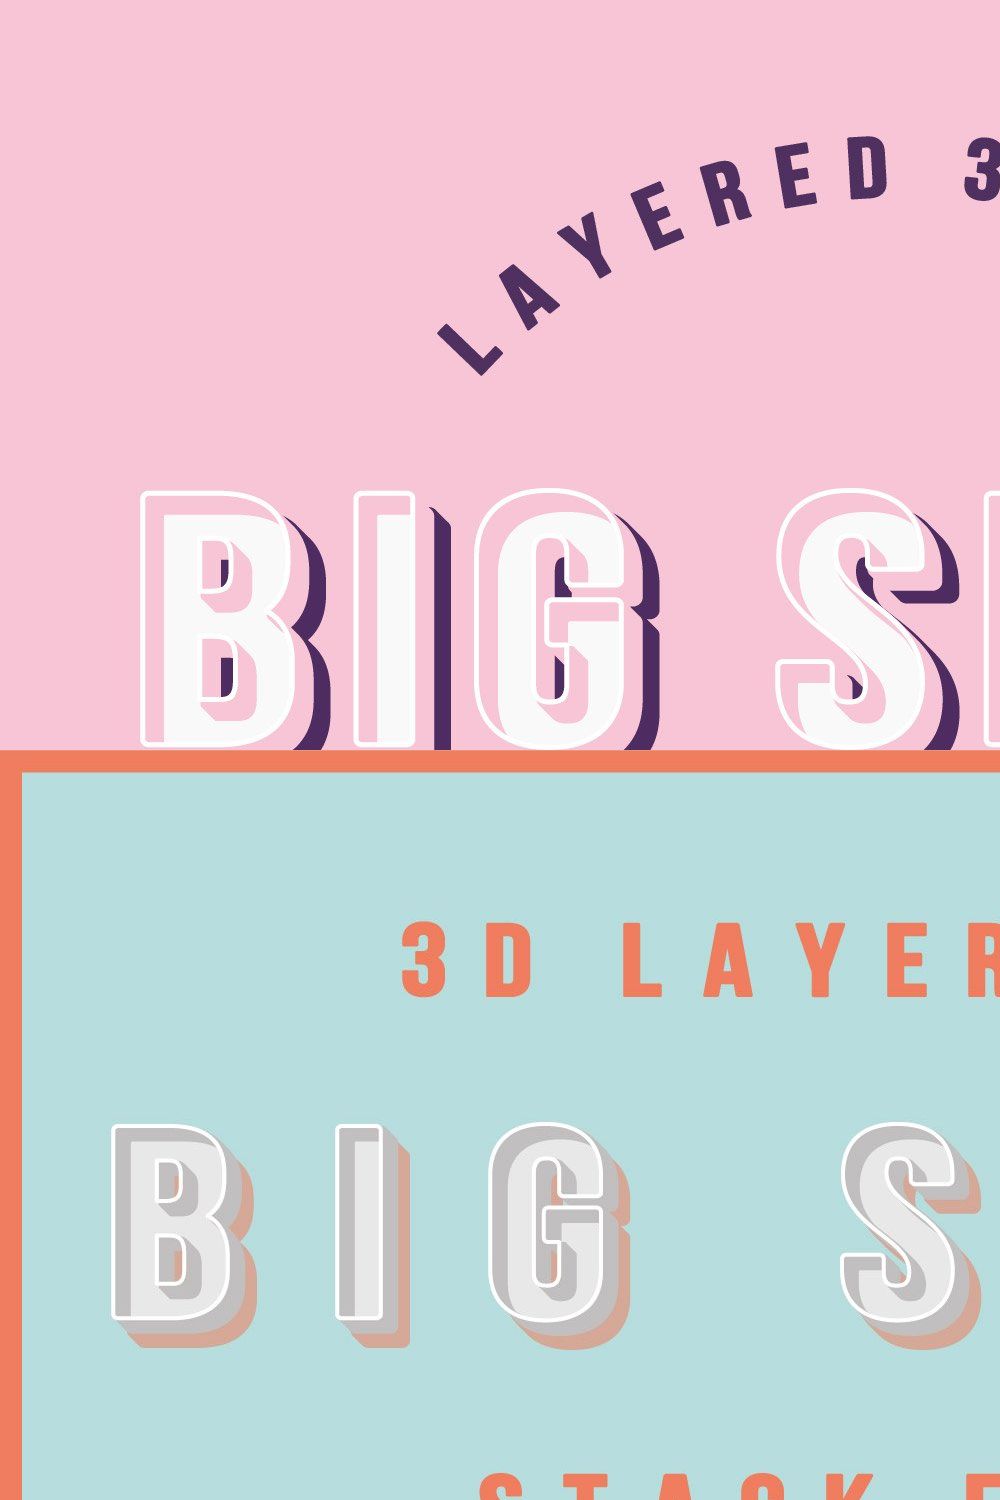 BIG SHOW - Layered 3D font pinterest preview image.